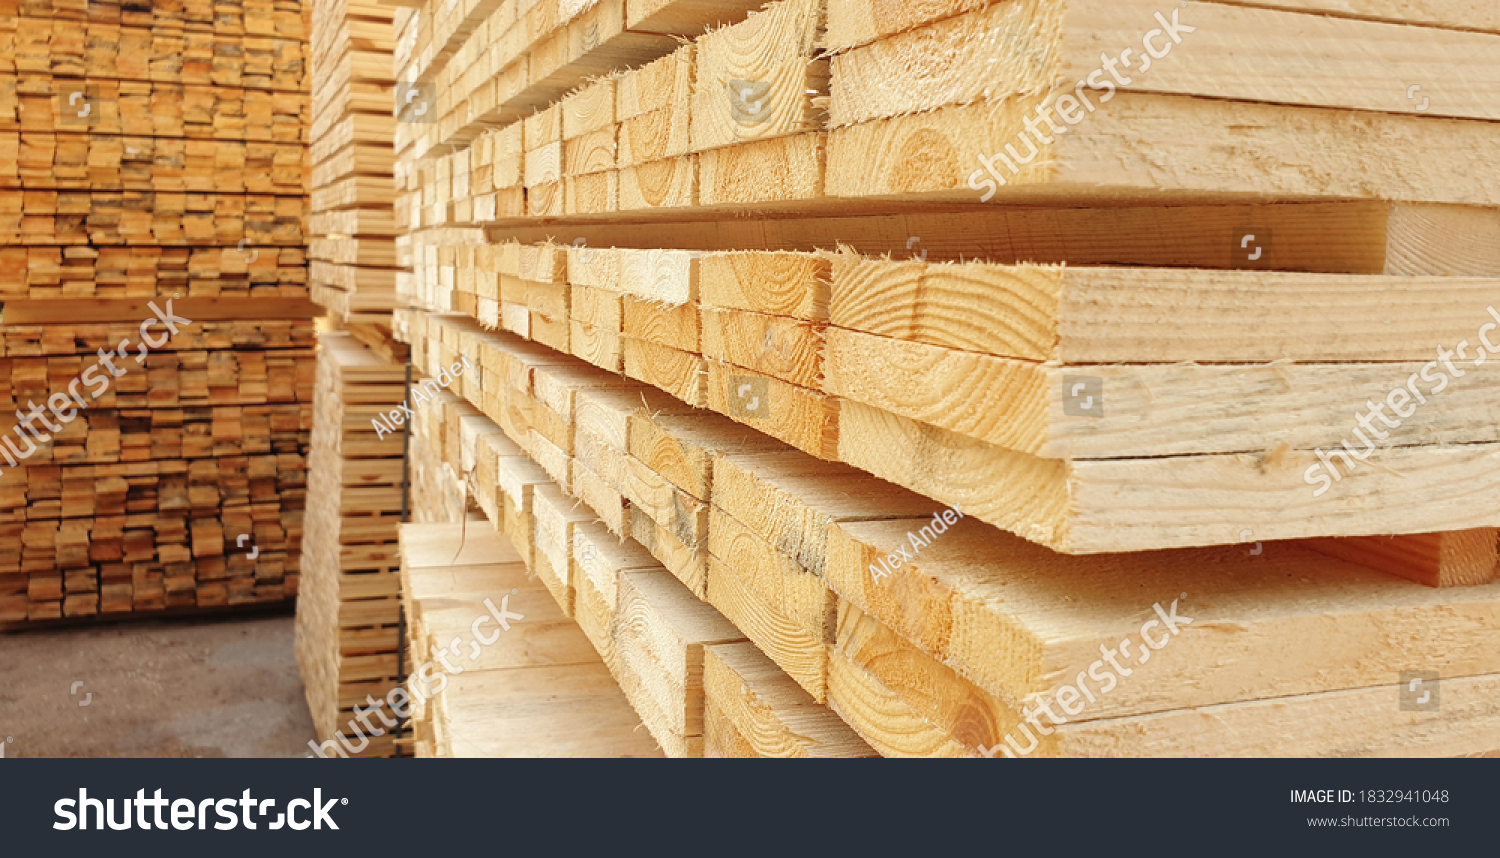 Raw wood drying in the lumber warehouse #1832941048